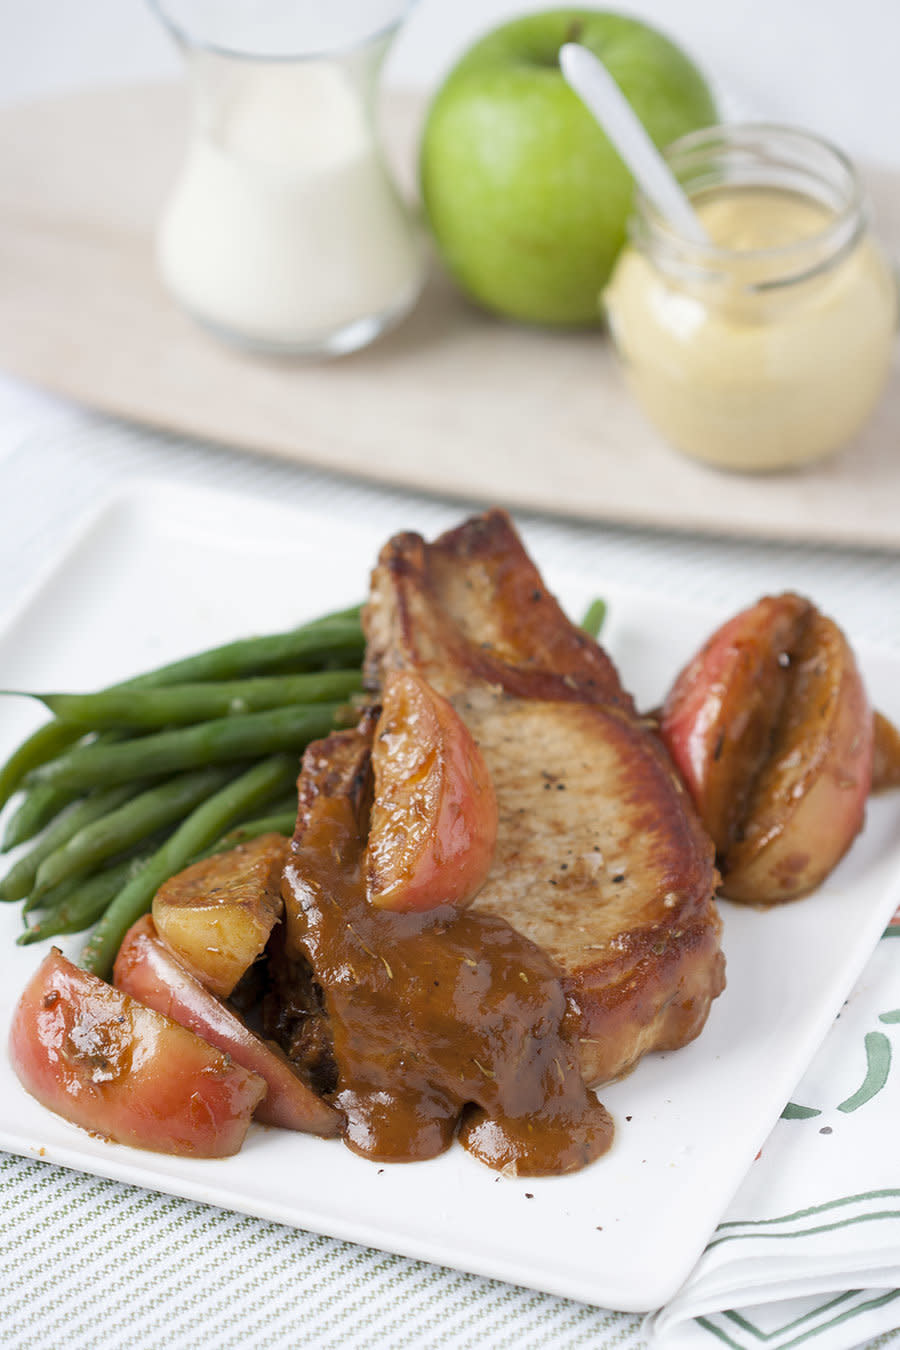 <strong>Get the <a href="http://singlyscrumptious.com/creamy-pork-chop-with-mustard-and-apples/" target="_blank">Creamy Pork Chop With Mustard And Apples recipe</a>&nbsp;from Singly Scrumptious</strong>